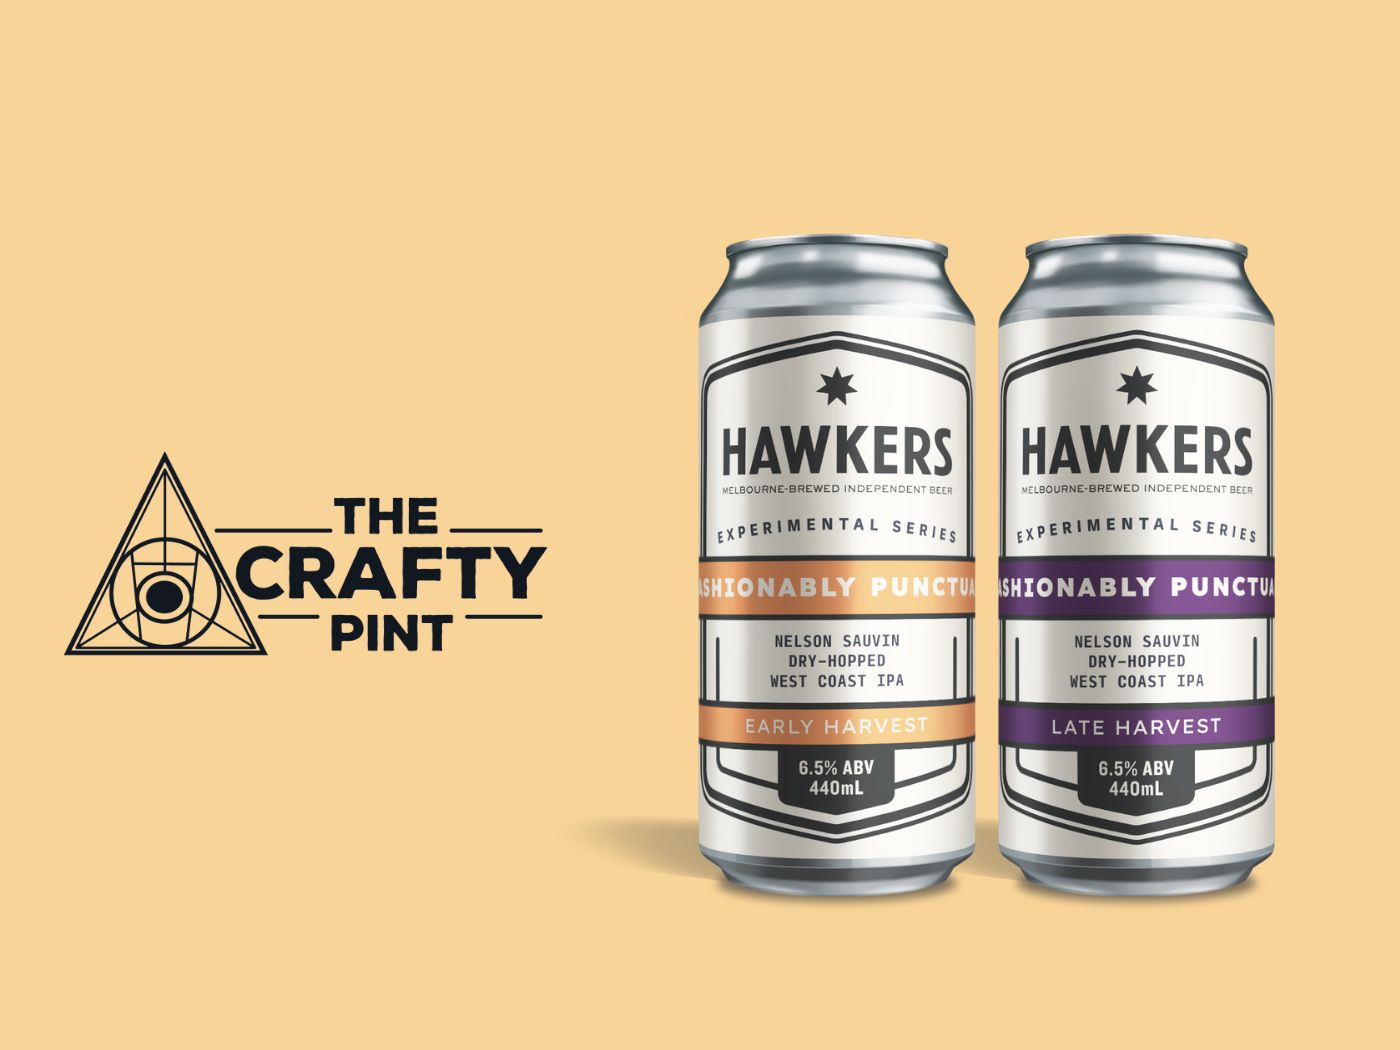 Hawkers Beer Fashionably Punctual